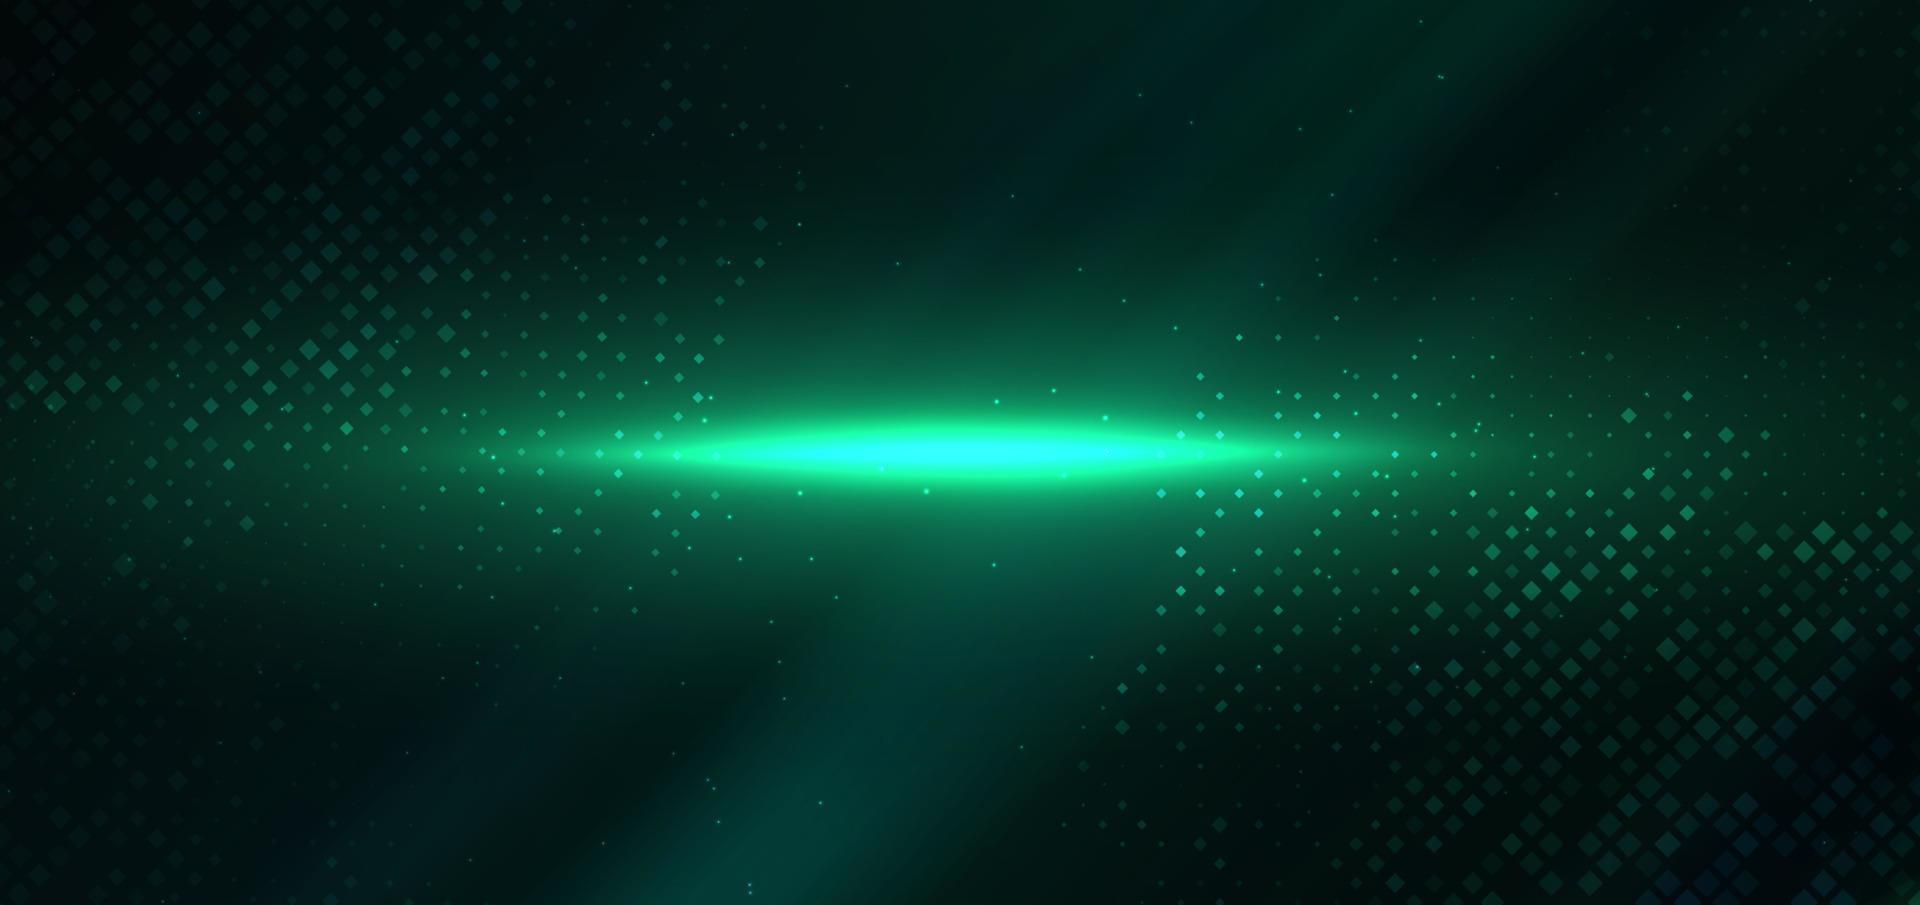 Abstract technology futuristic digital square pattern with lighting glowing particles square elements on dark green background. vector